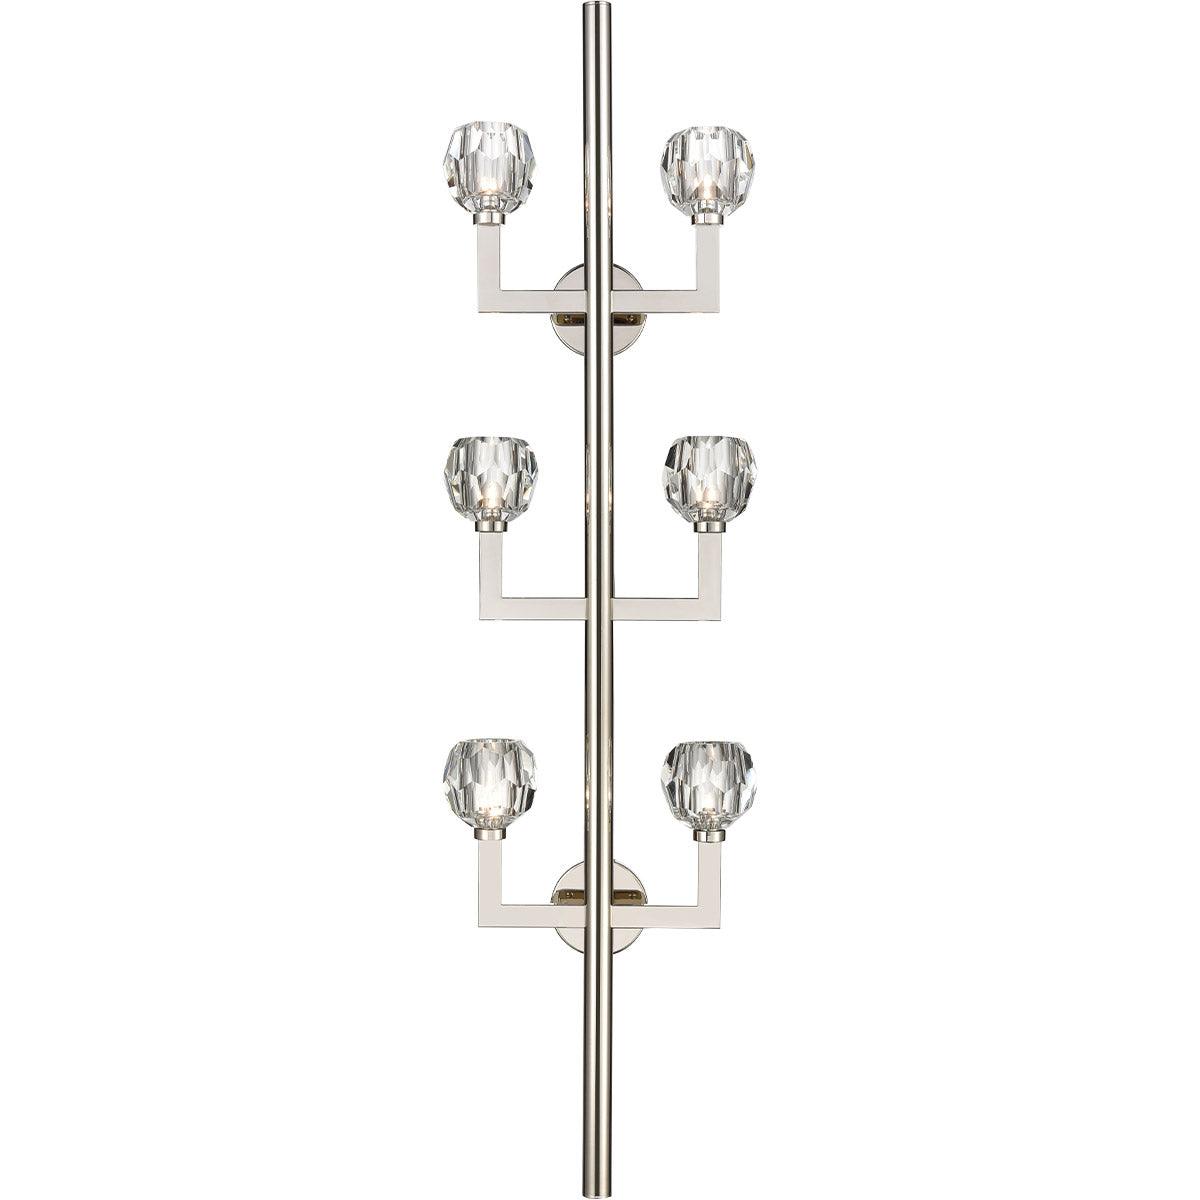 Steel Angled Arm with Clear Crystal Shade Wall Sconce - LV LIGHTING